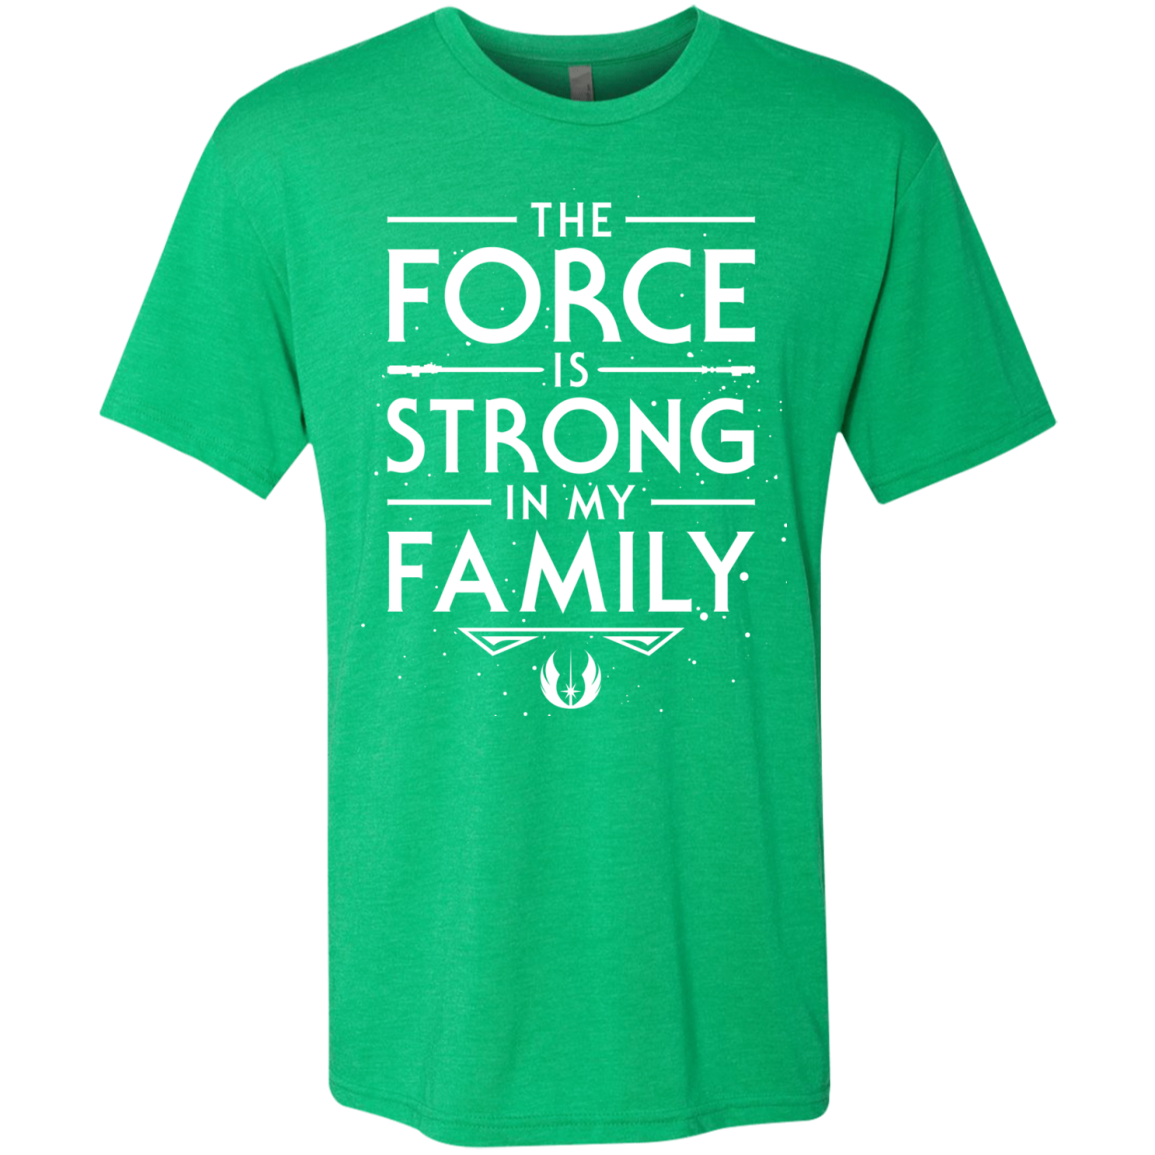 The Force is Strong in my Family Men's Triblend T-Shirt